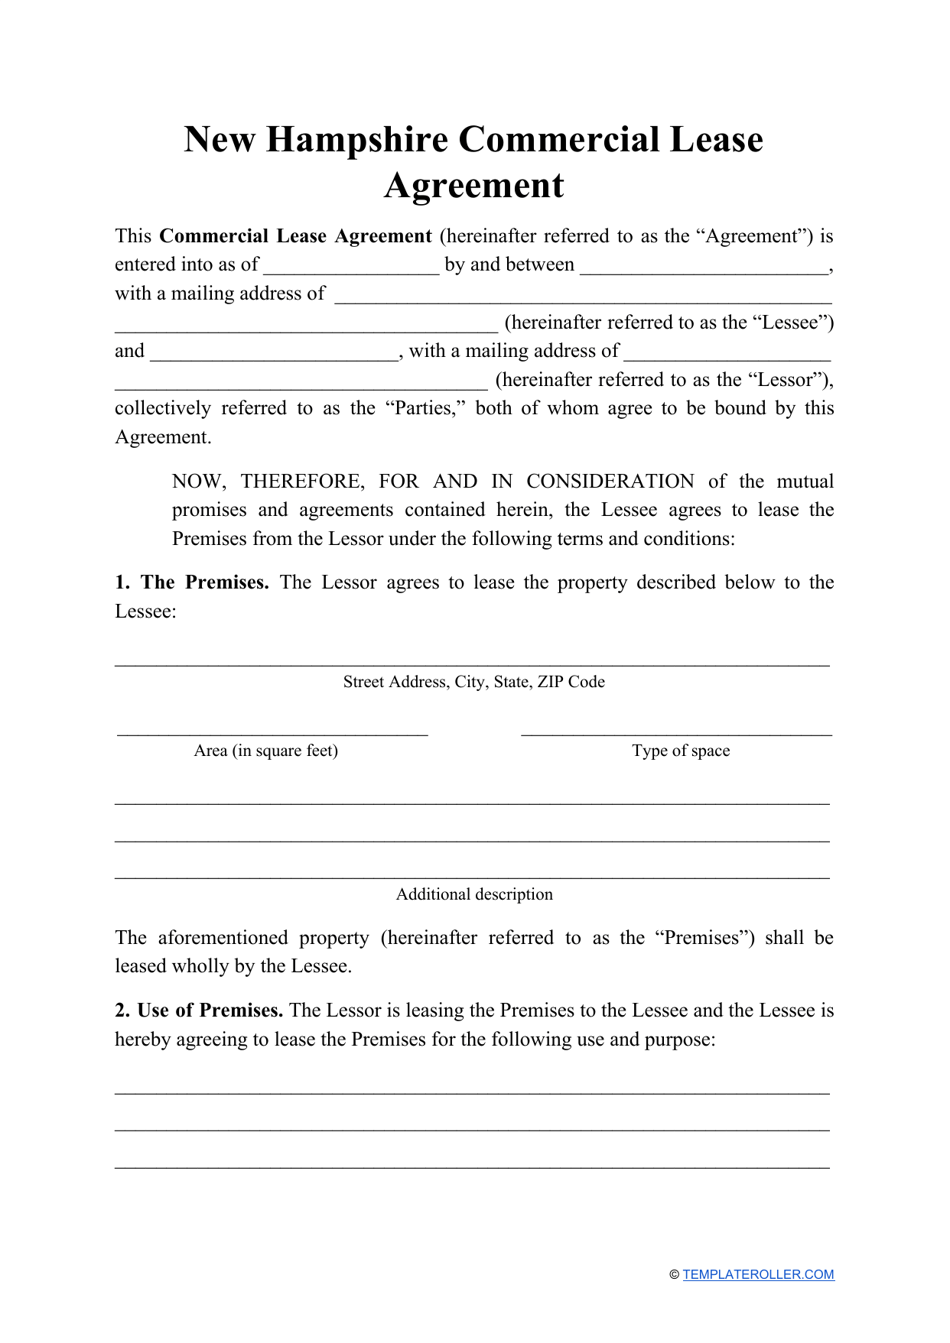 Commercial Lease Agreement Template - New Hampshire, Page 1